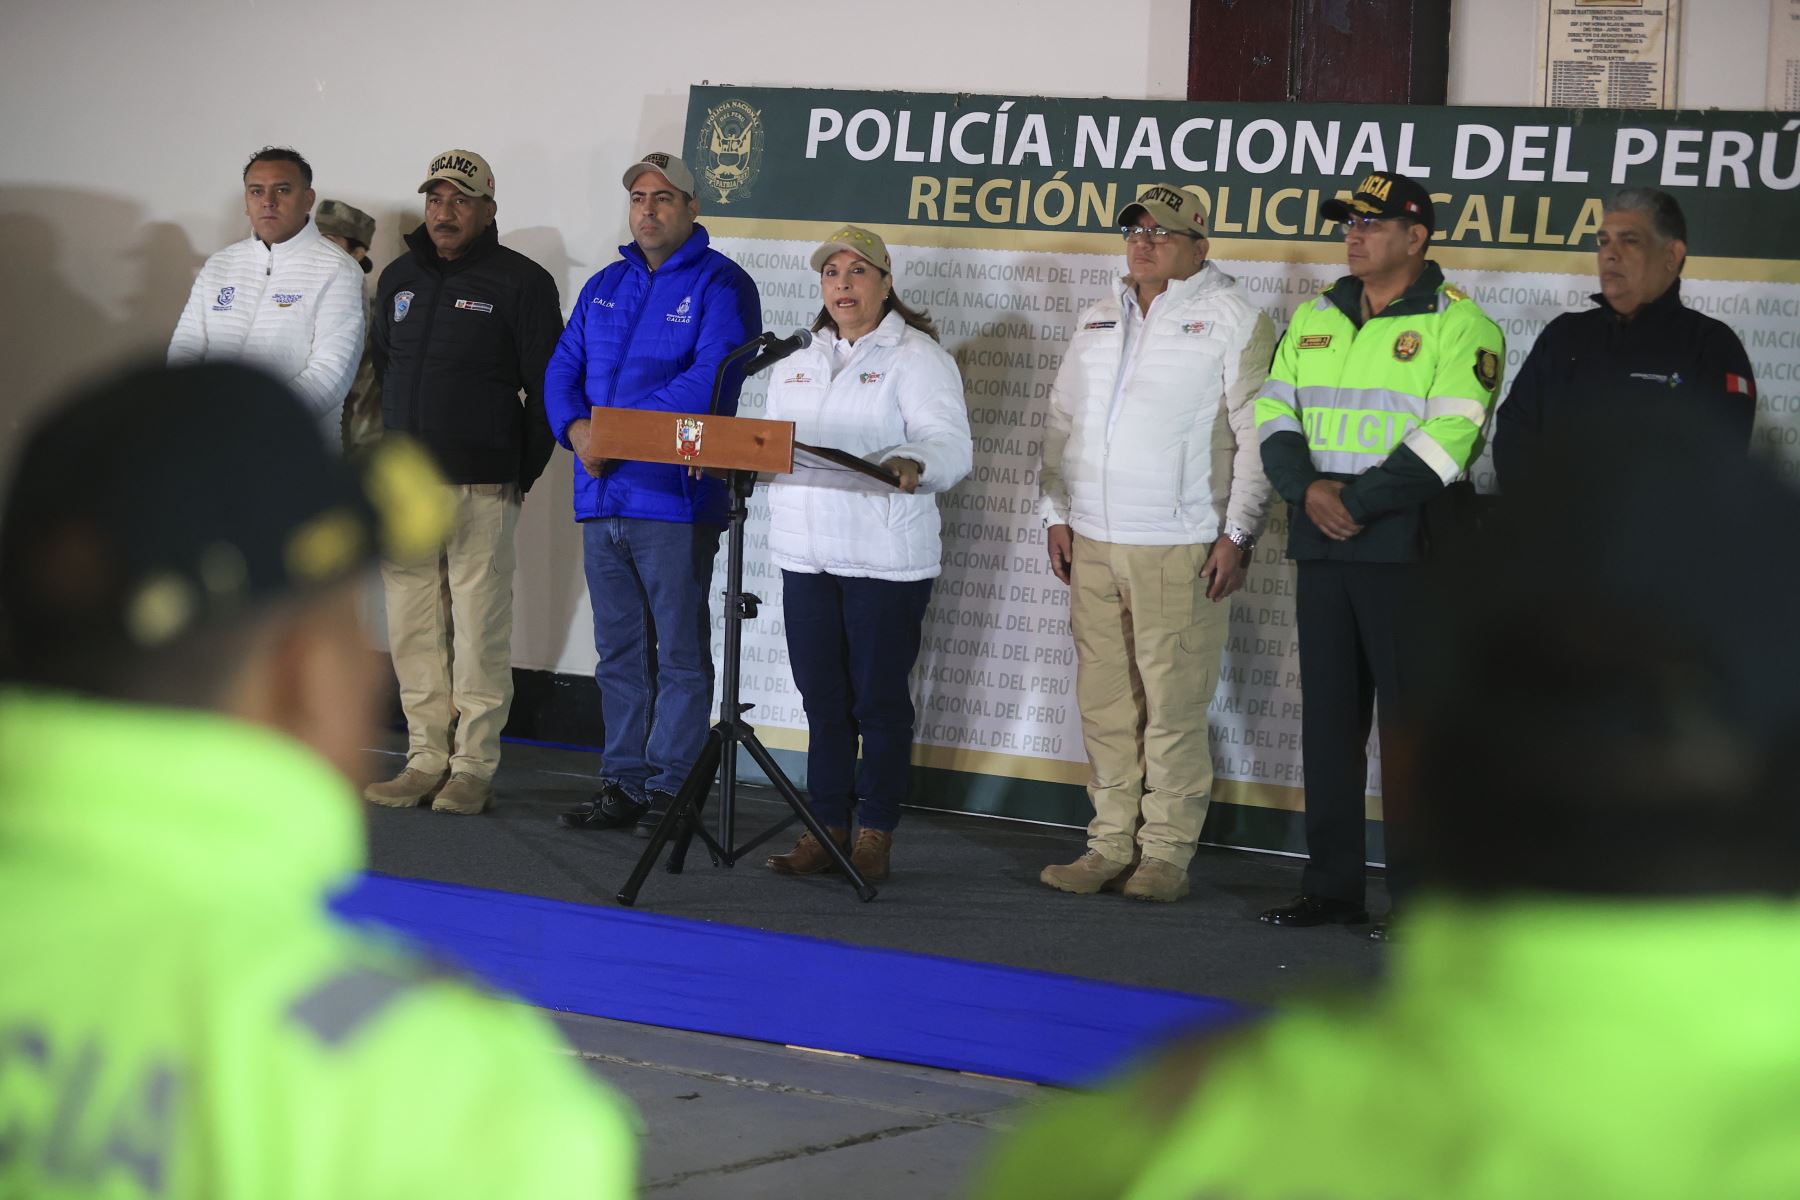 President: We are fighting delinquency and organized crime in Peru